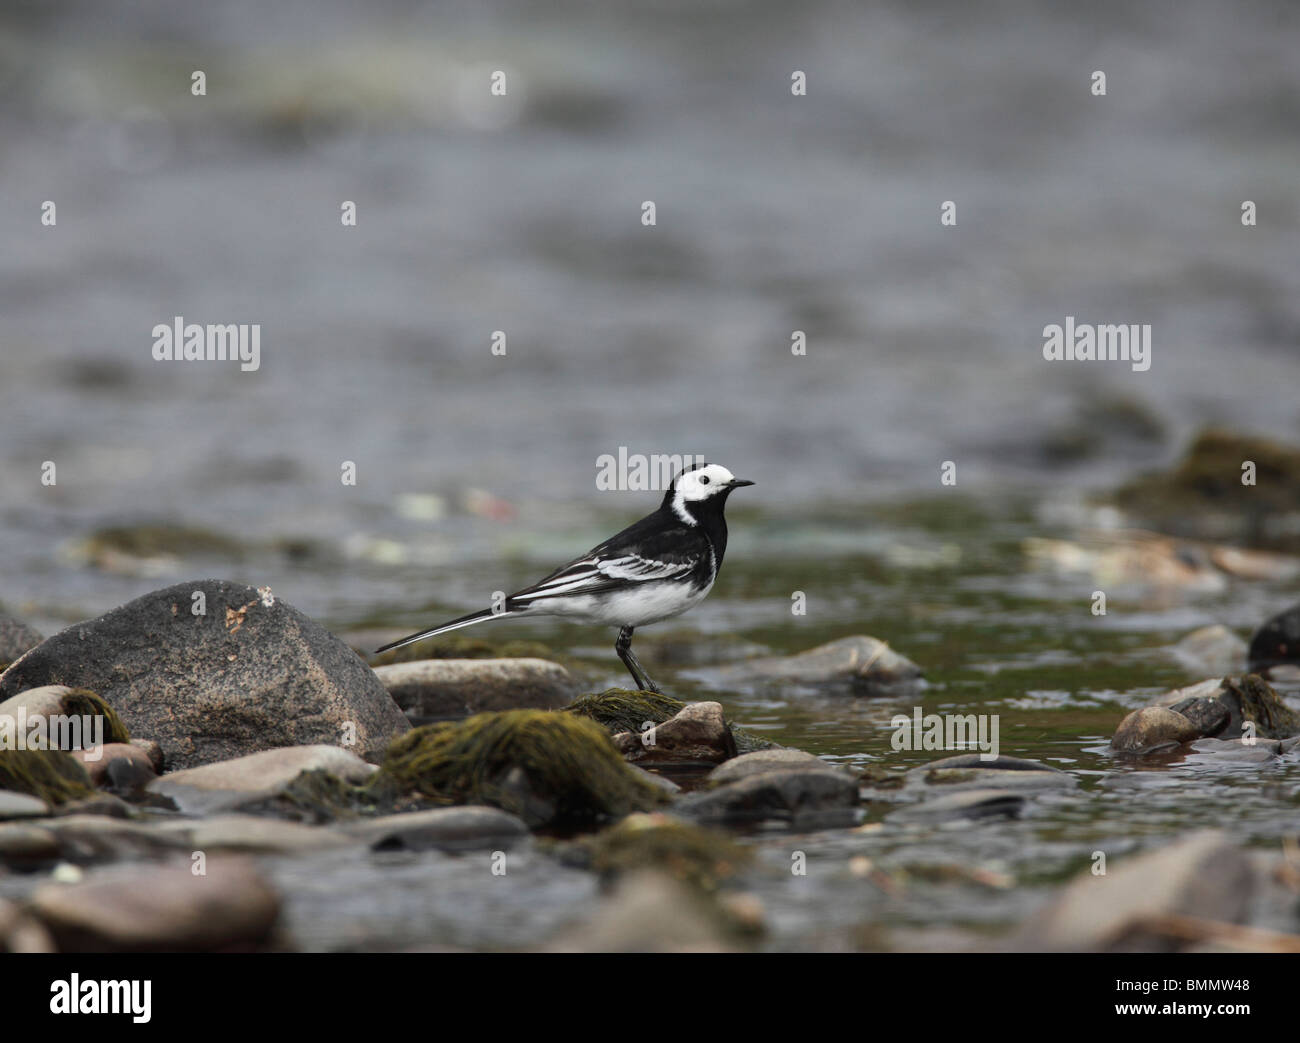 Pied wagtail (Motacilla alba) standing on stone at rivers edge Stock Photo